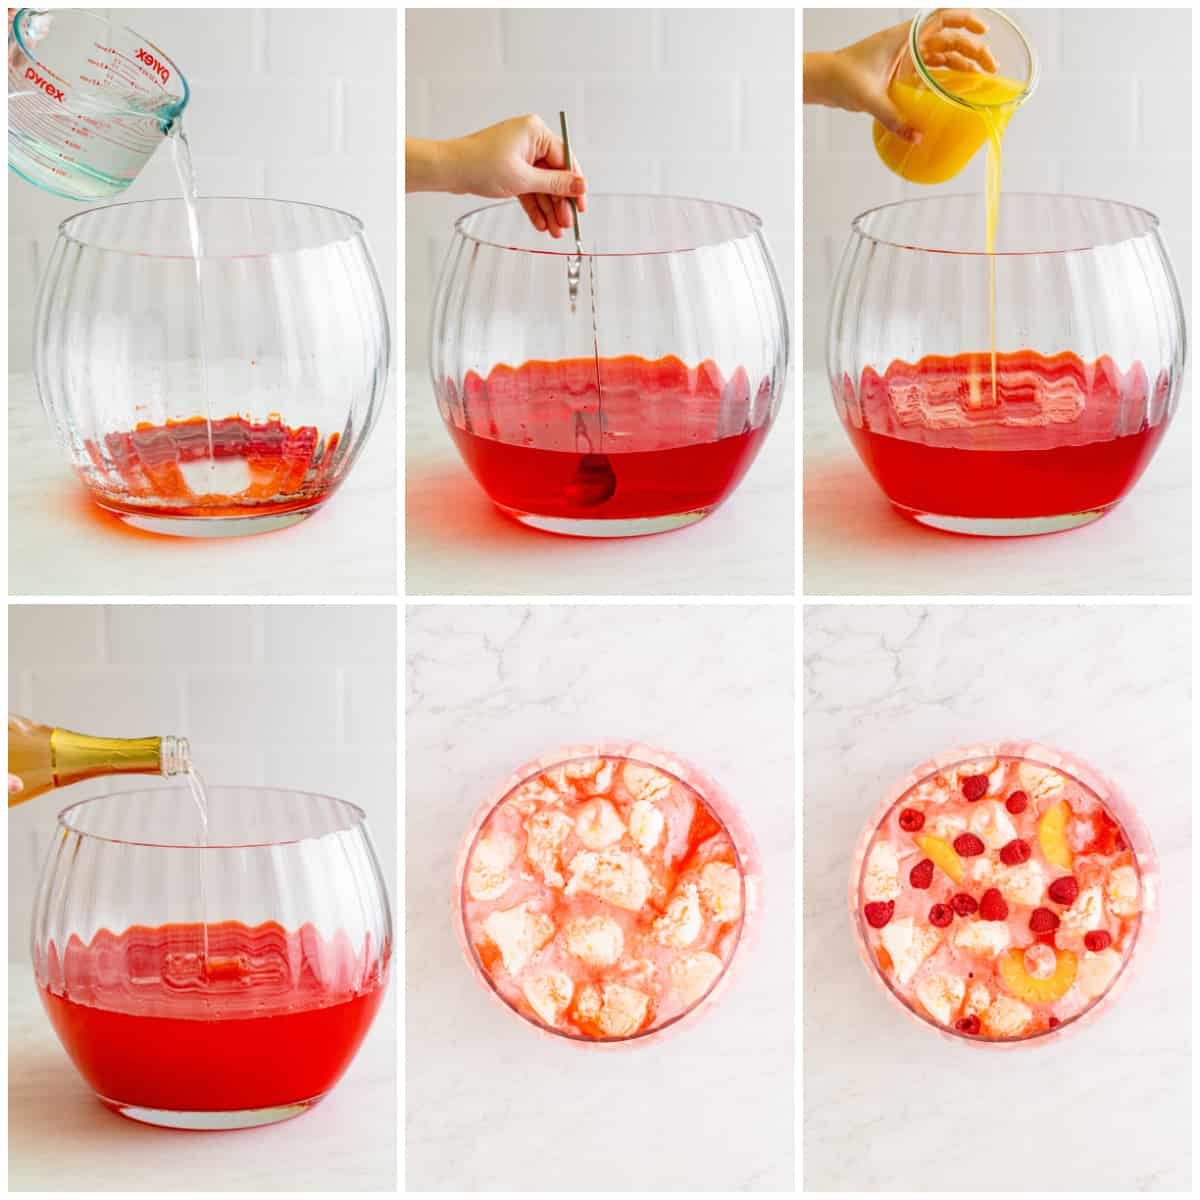 Step by step photos on how to make Boozy Sherbet Punch.